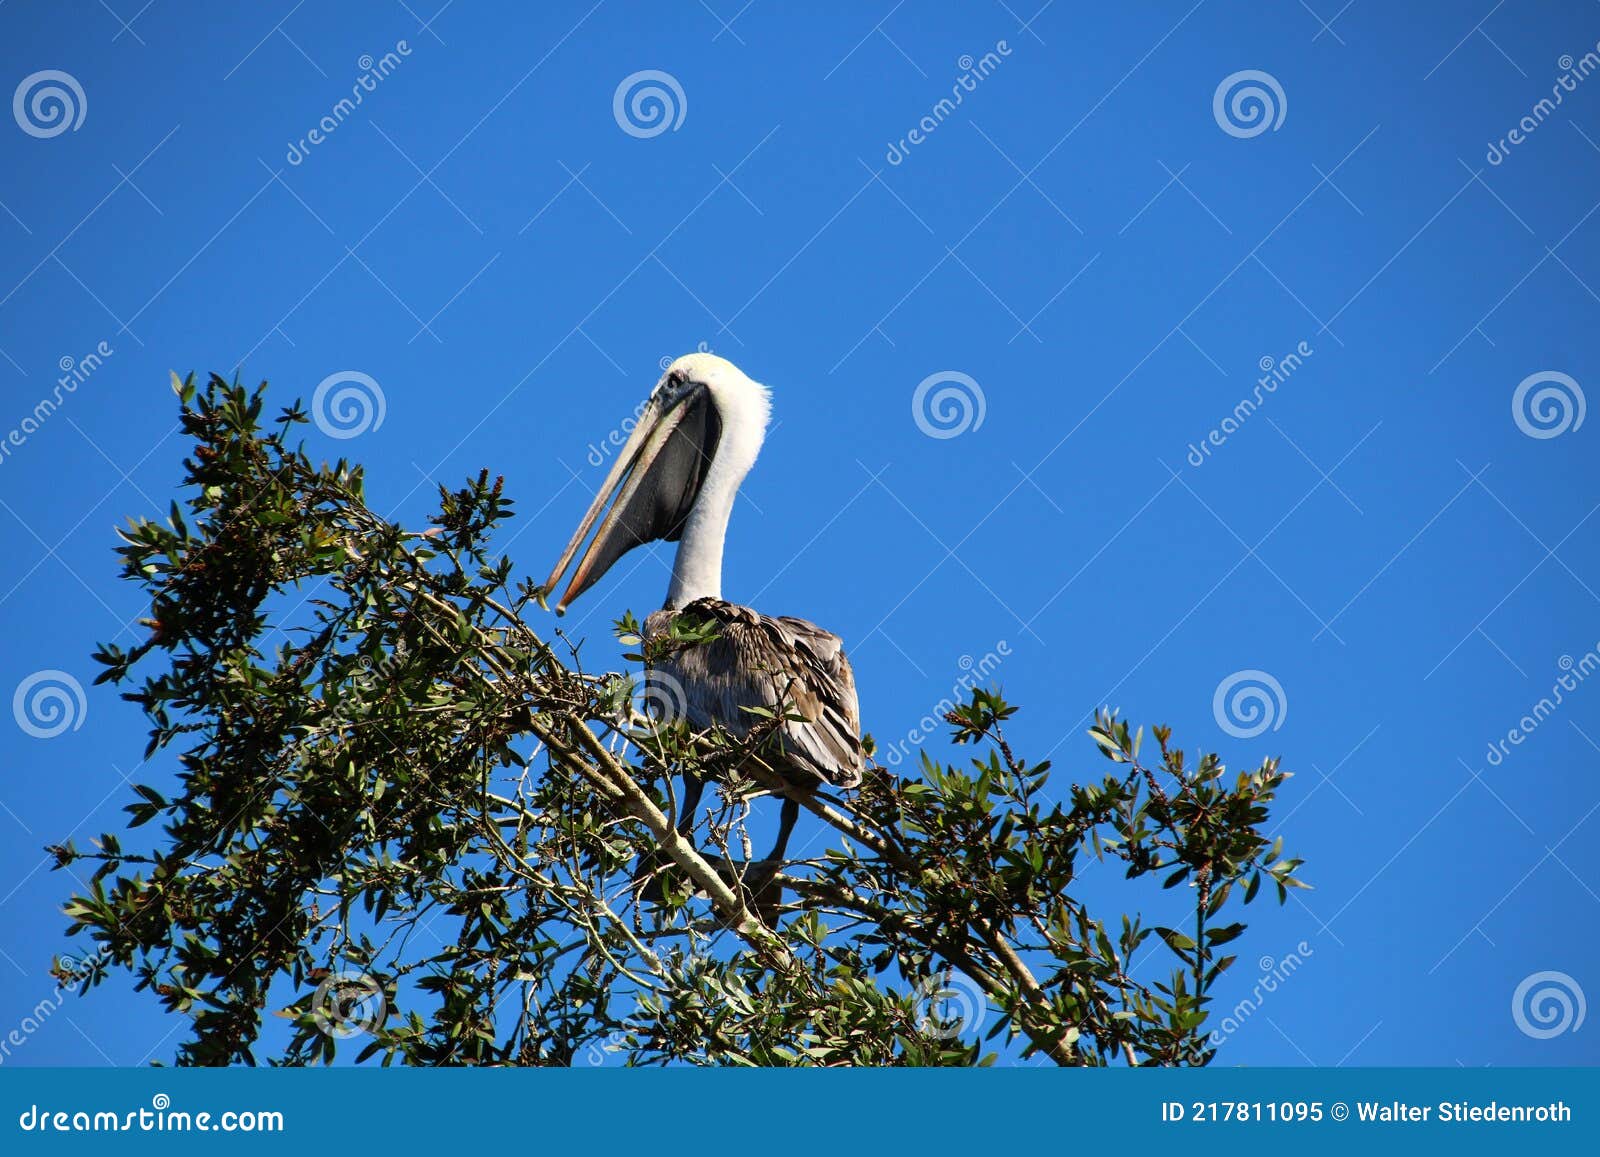 brown pelican on a tree